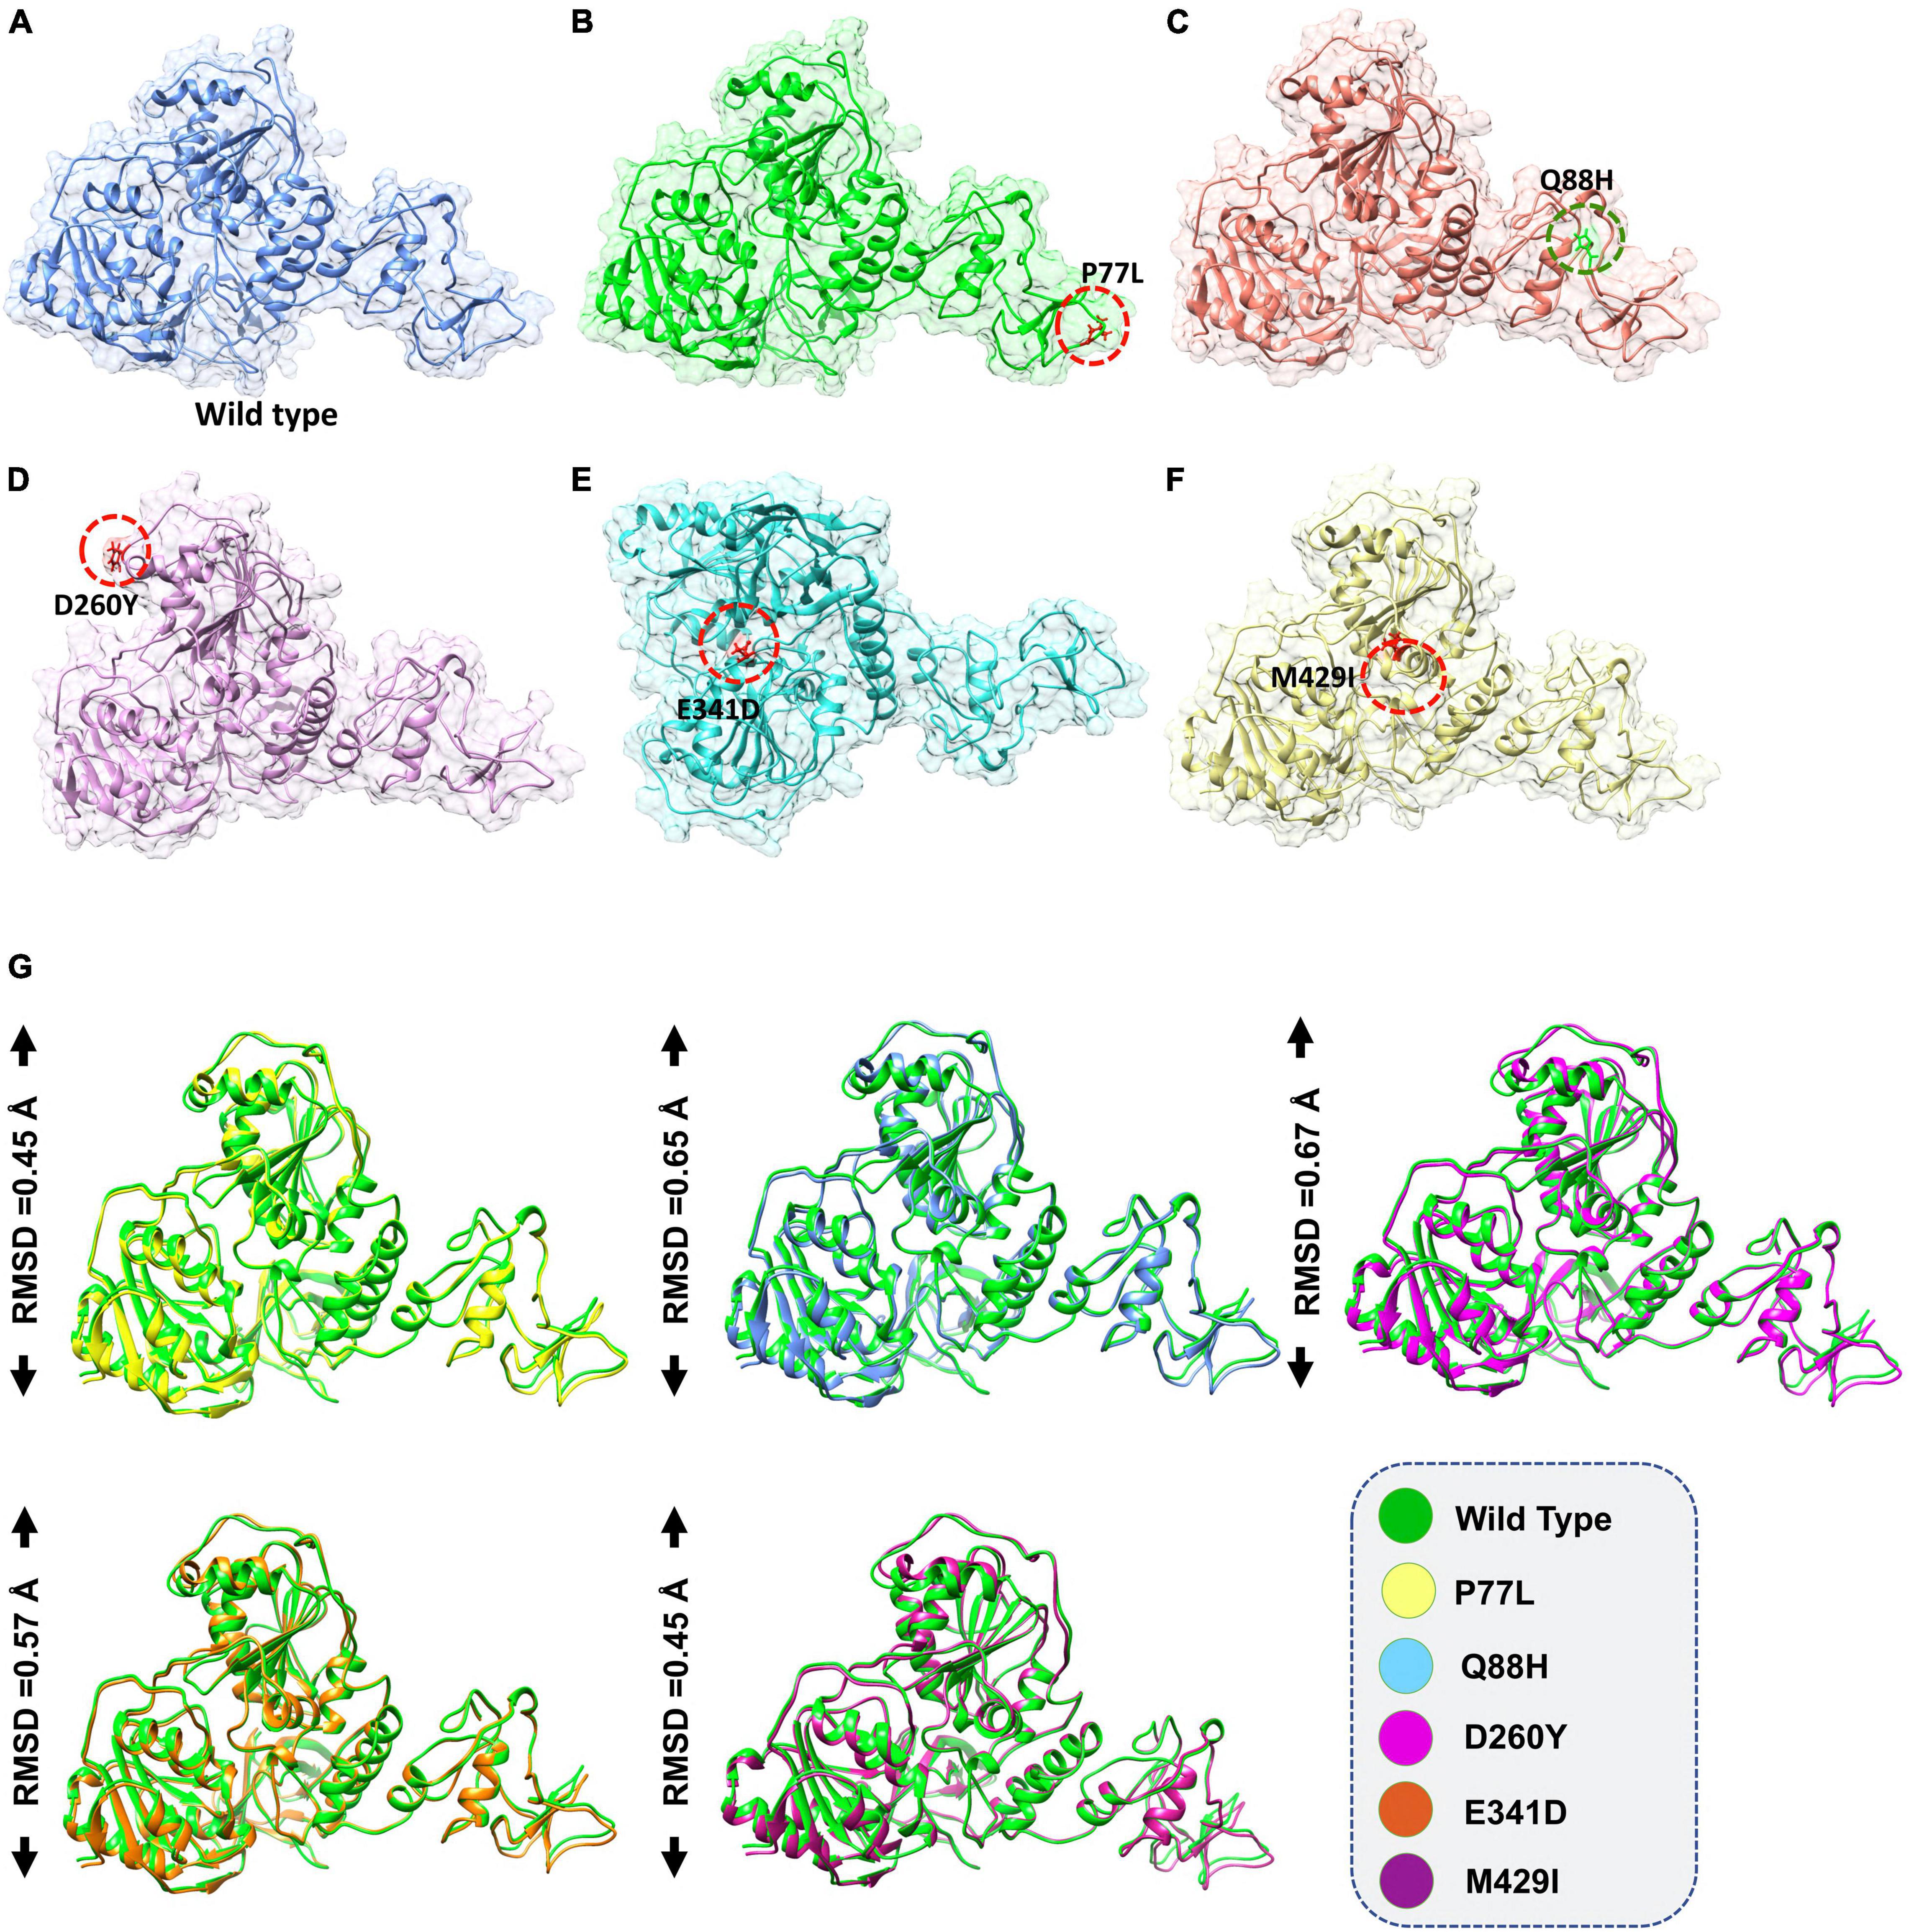 Frontiers  A Bioinformatics Approach to Investigate Structural and  Non-Structural Proteins in Human Coronaviruses